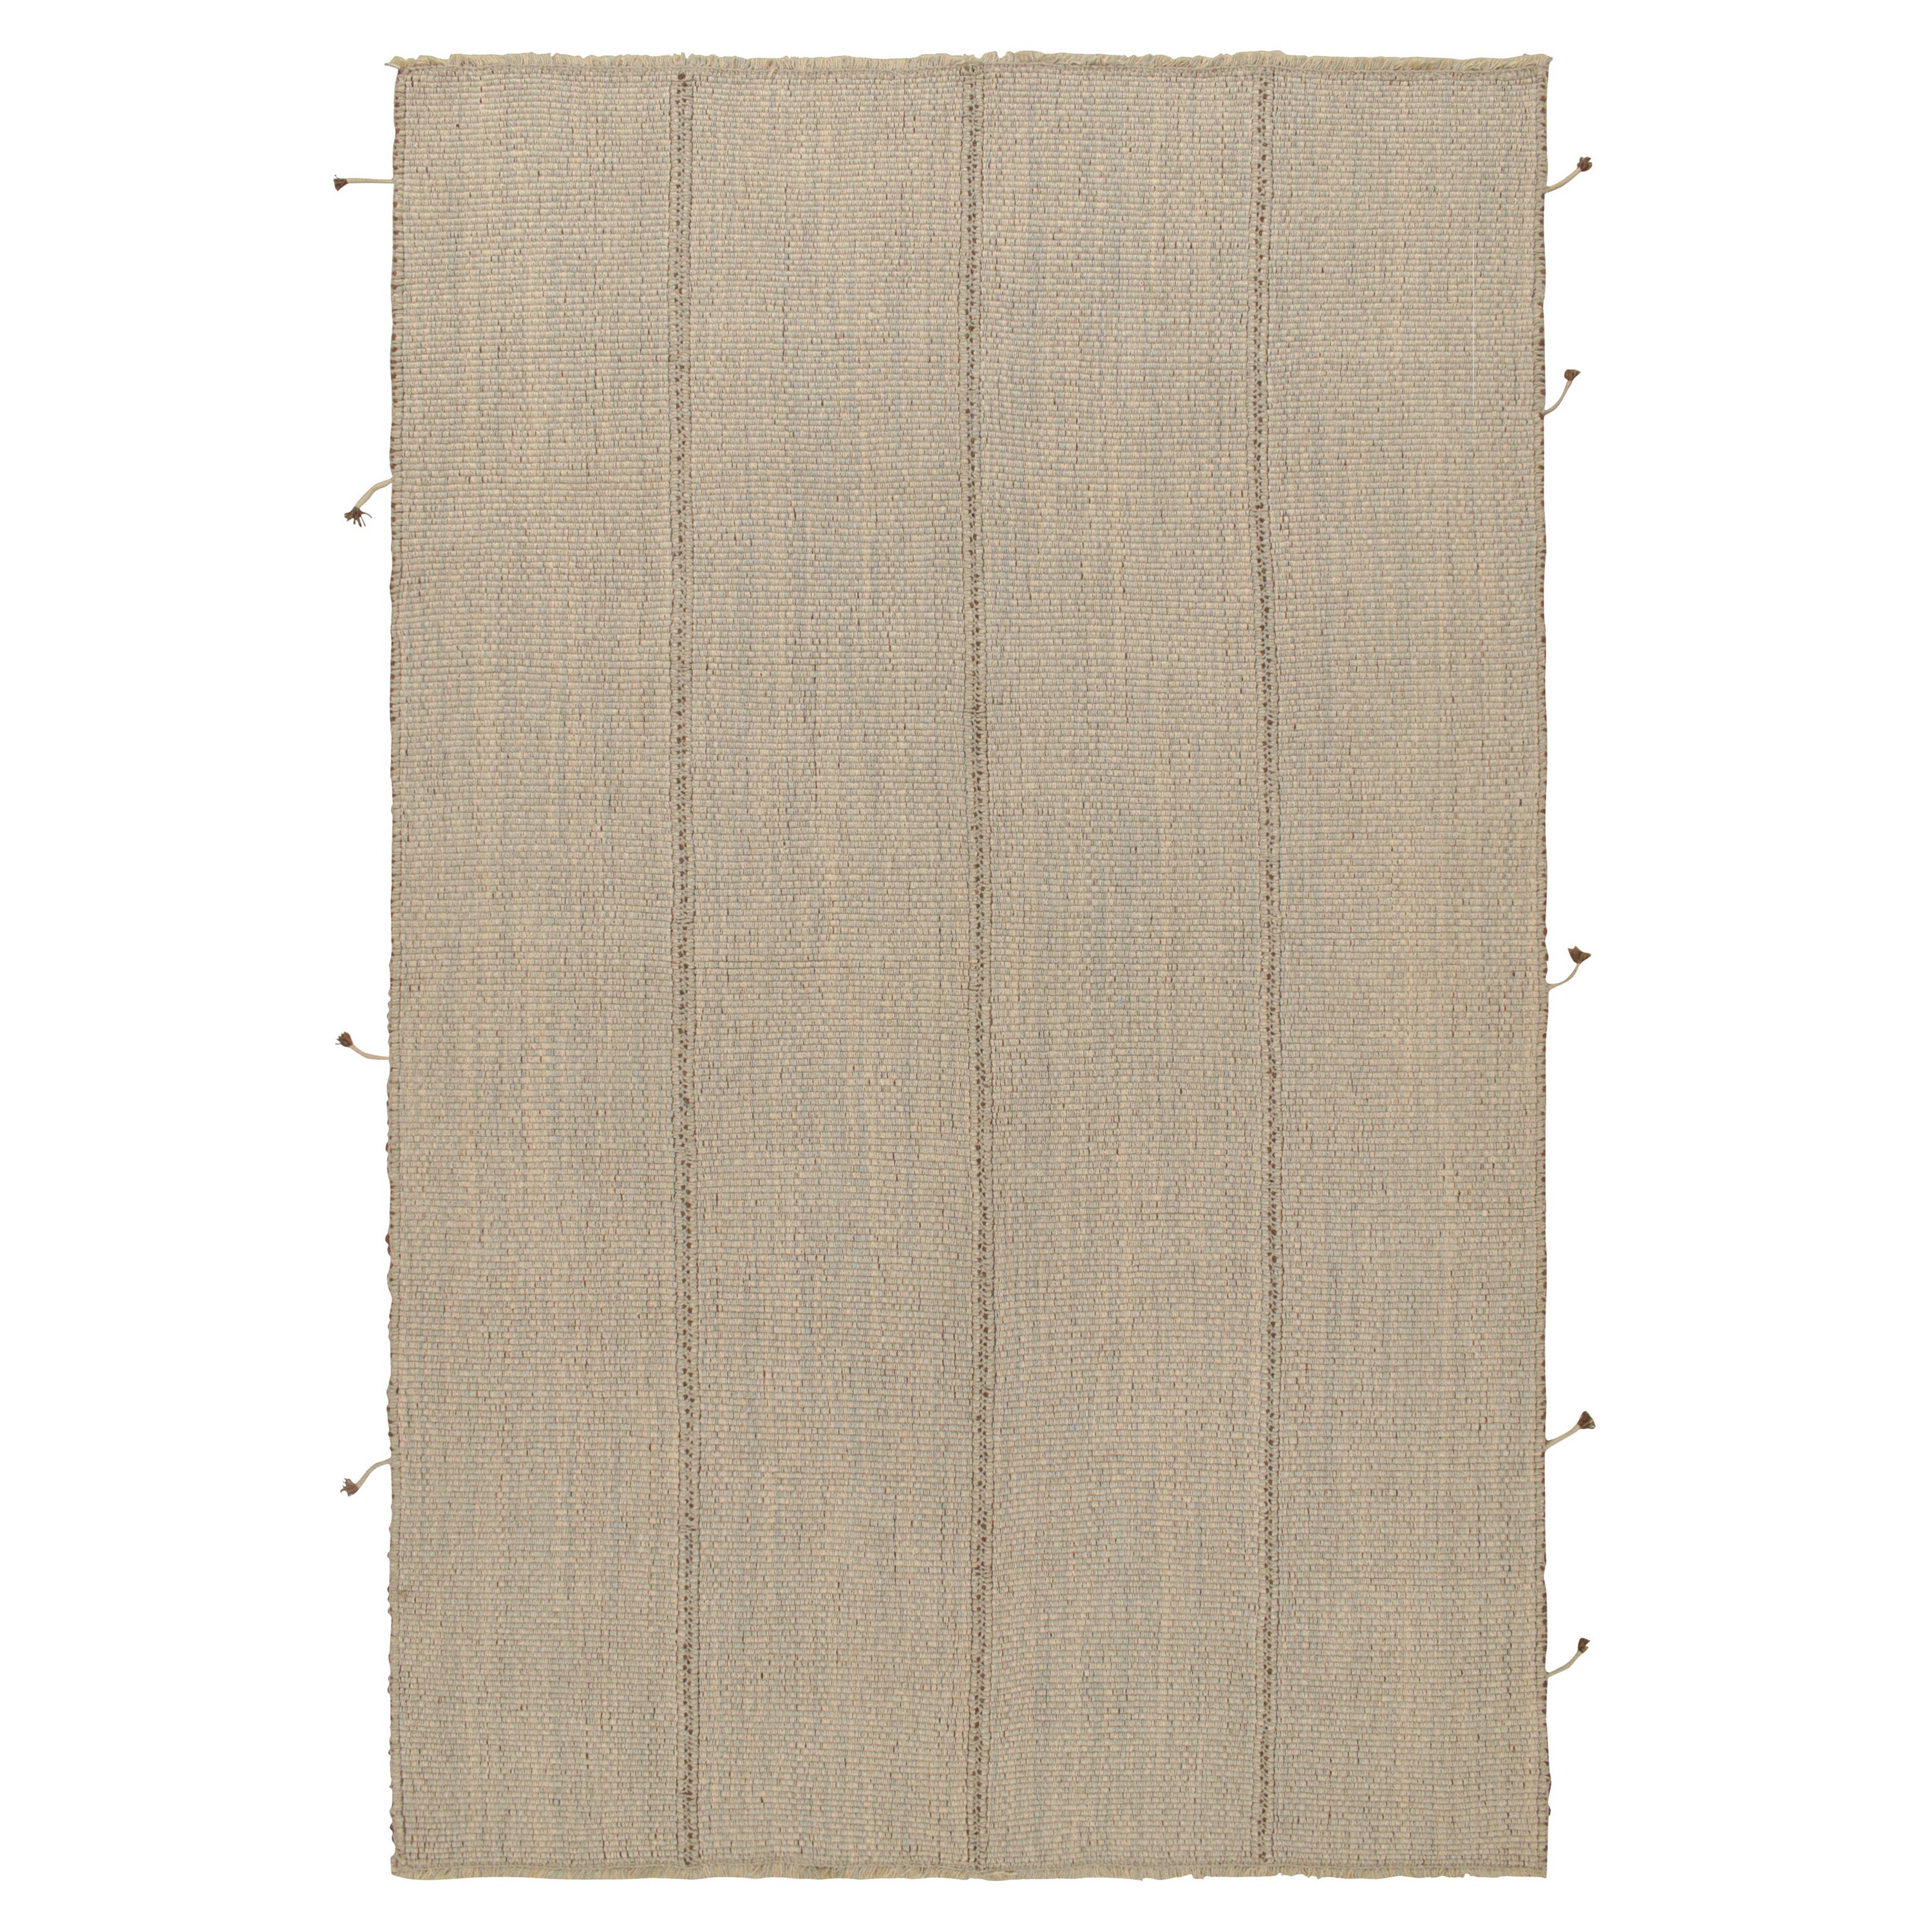 Rug & Kilim’s Contemporary Kilim in Beige with Brown and Light Blue Accents